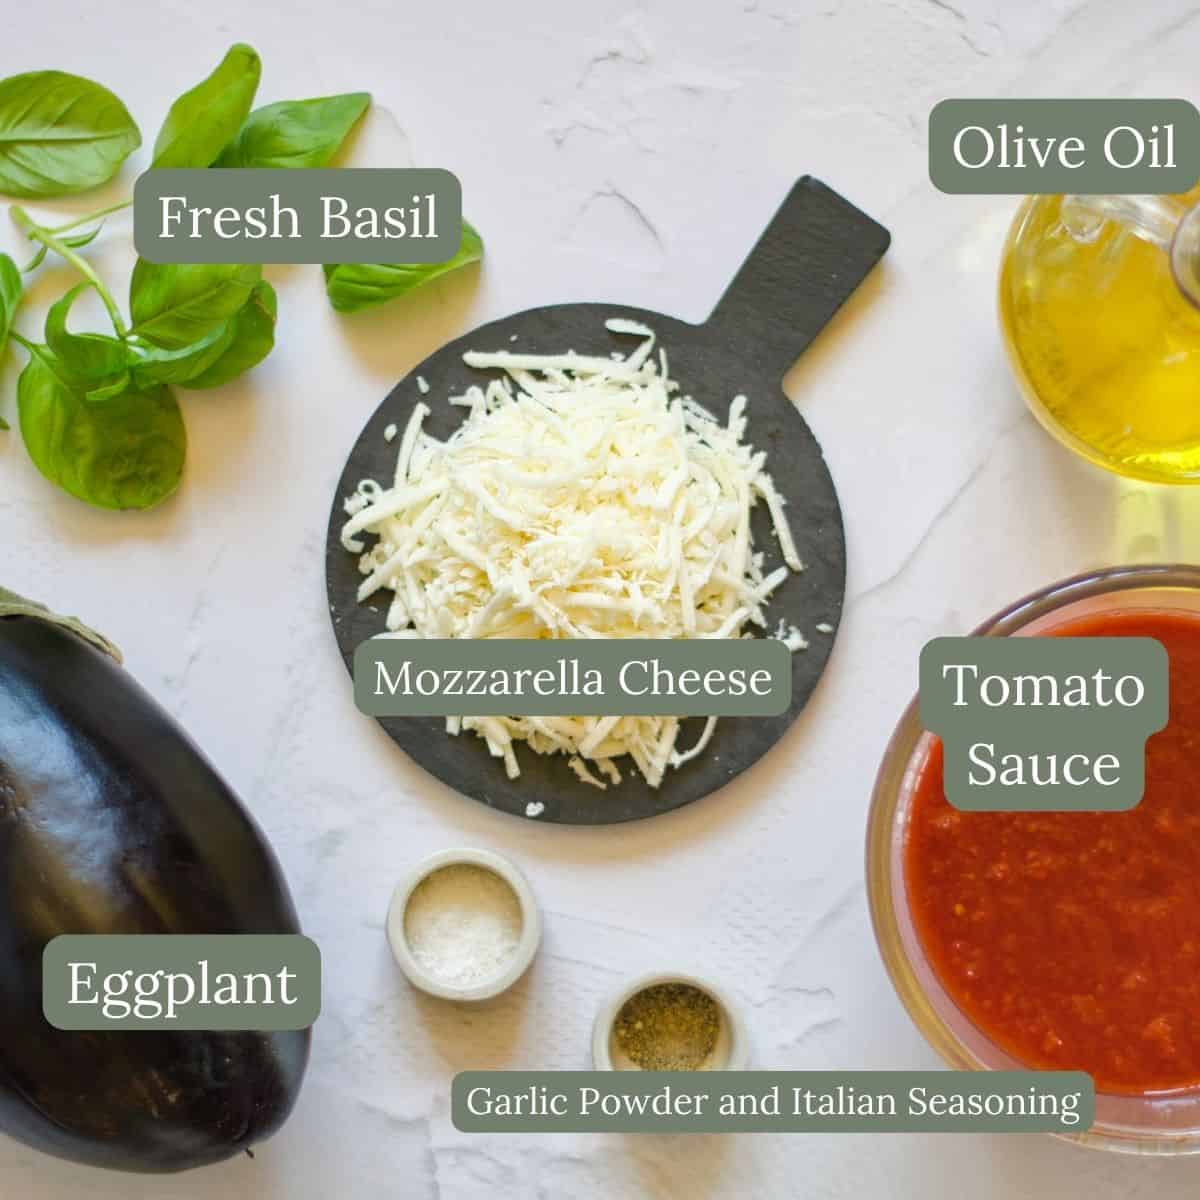 ingredients for Baked Eggplant Parmesan Without Breadcrumbs Recipe which include eggplant, mozzarella cheese, tomato sauce, basil, and olive oil.